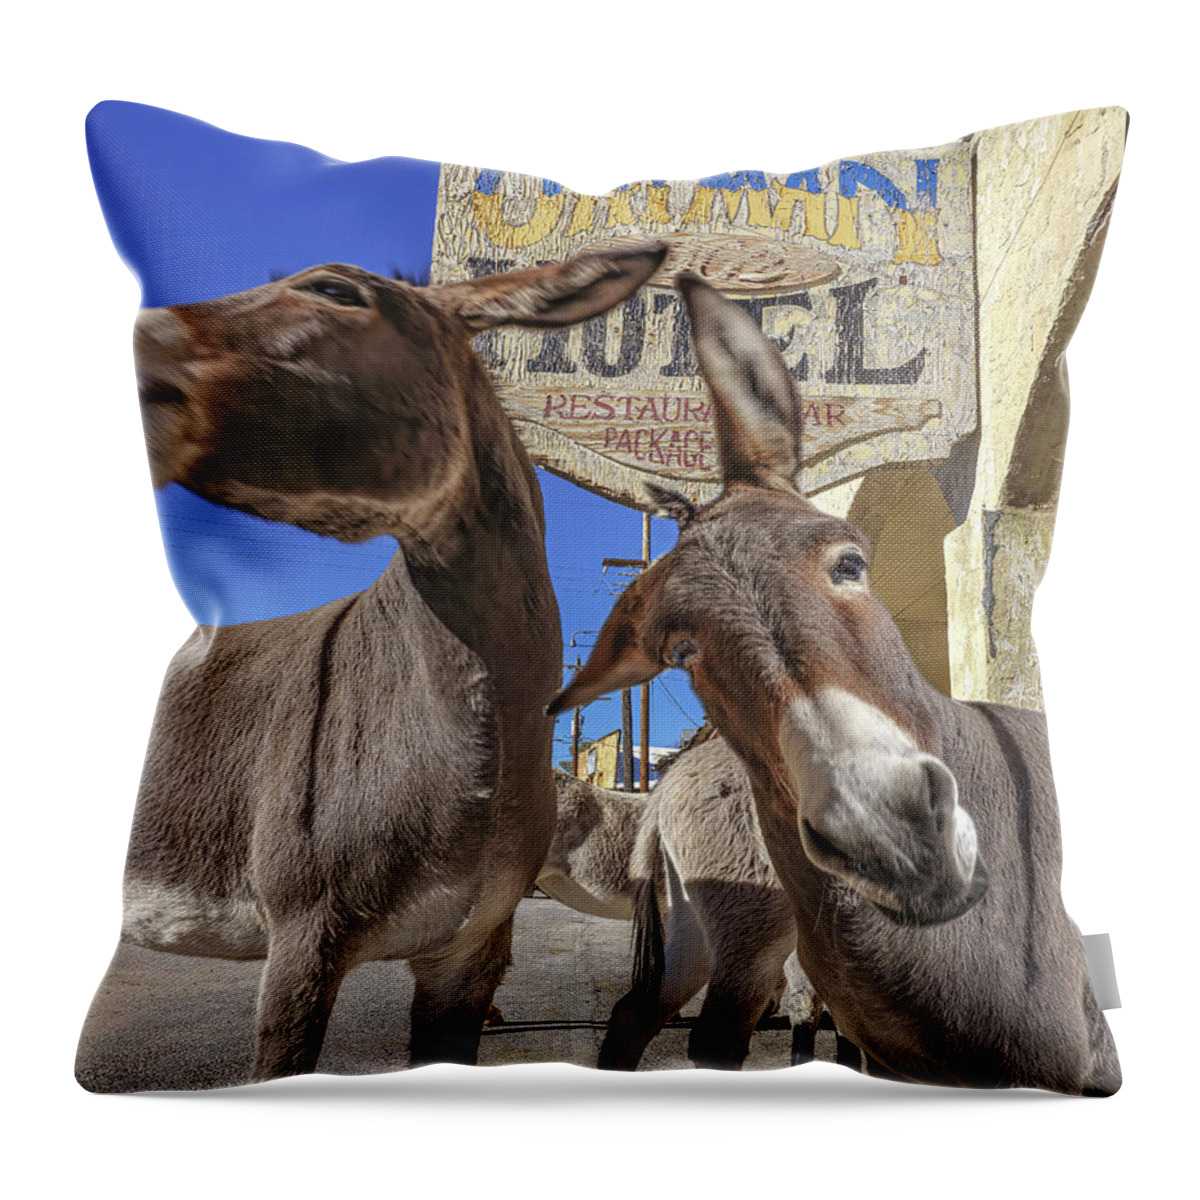 Donkeys Throw Pillow featuring the photograph Wild And Crazy Long Ears by Don Schimmel